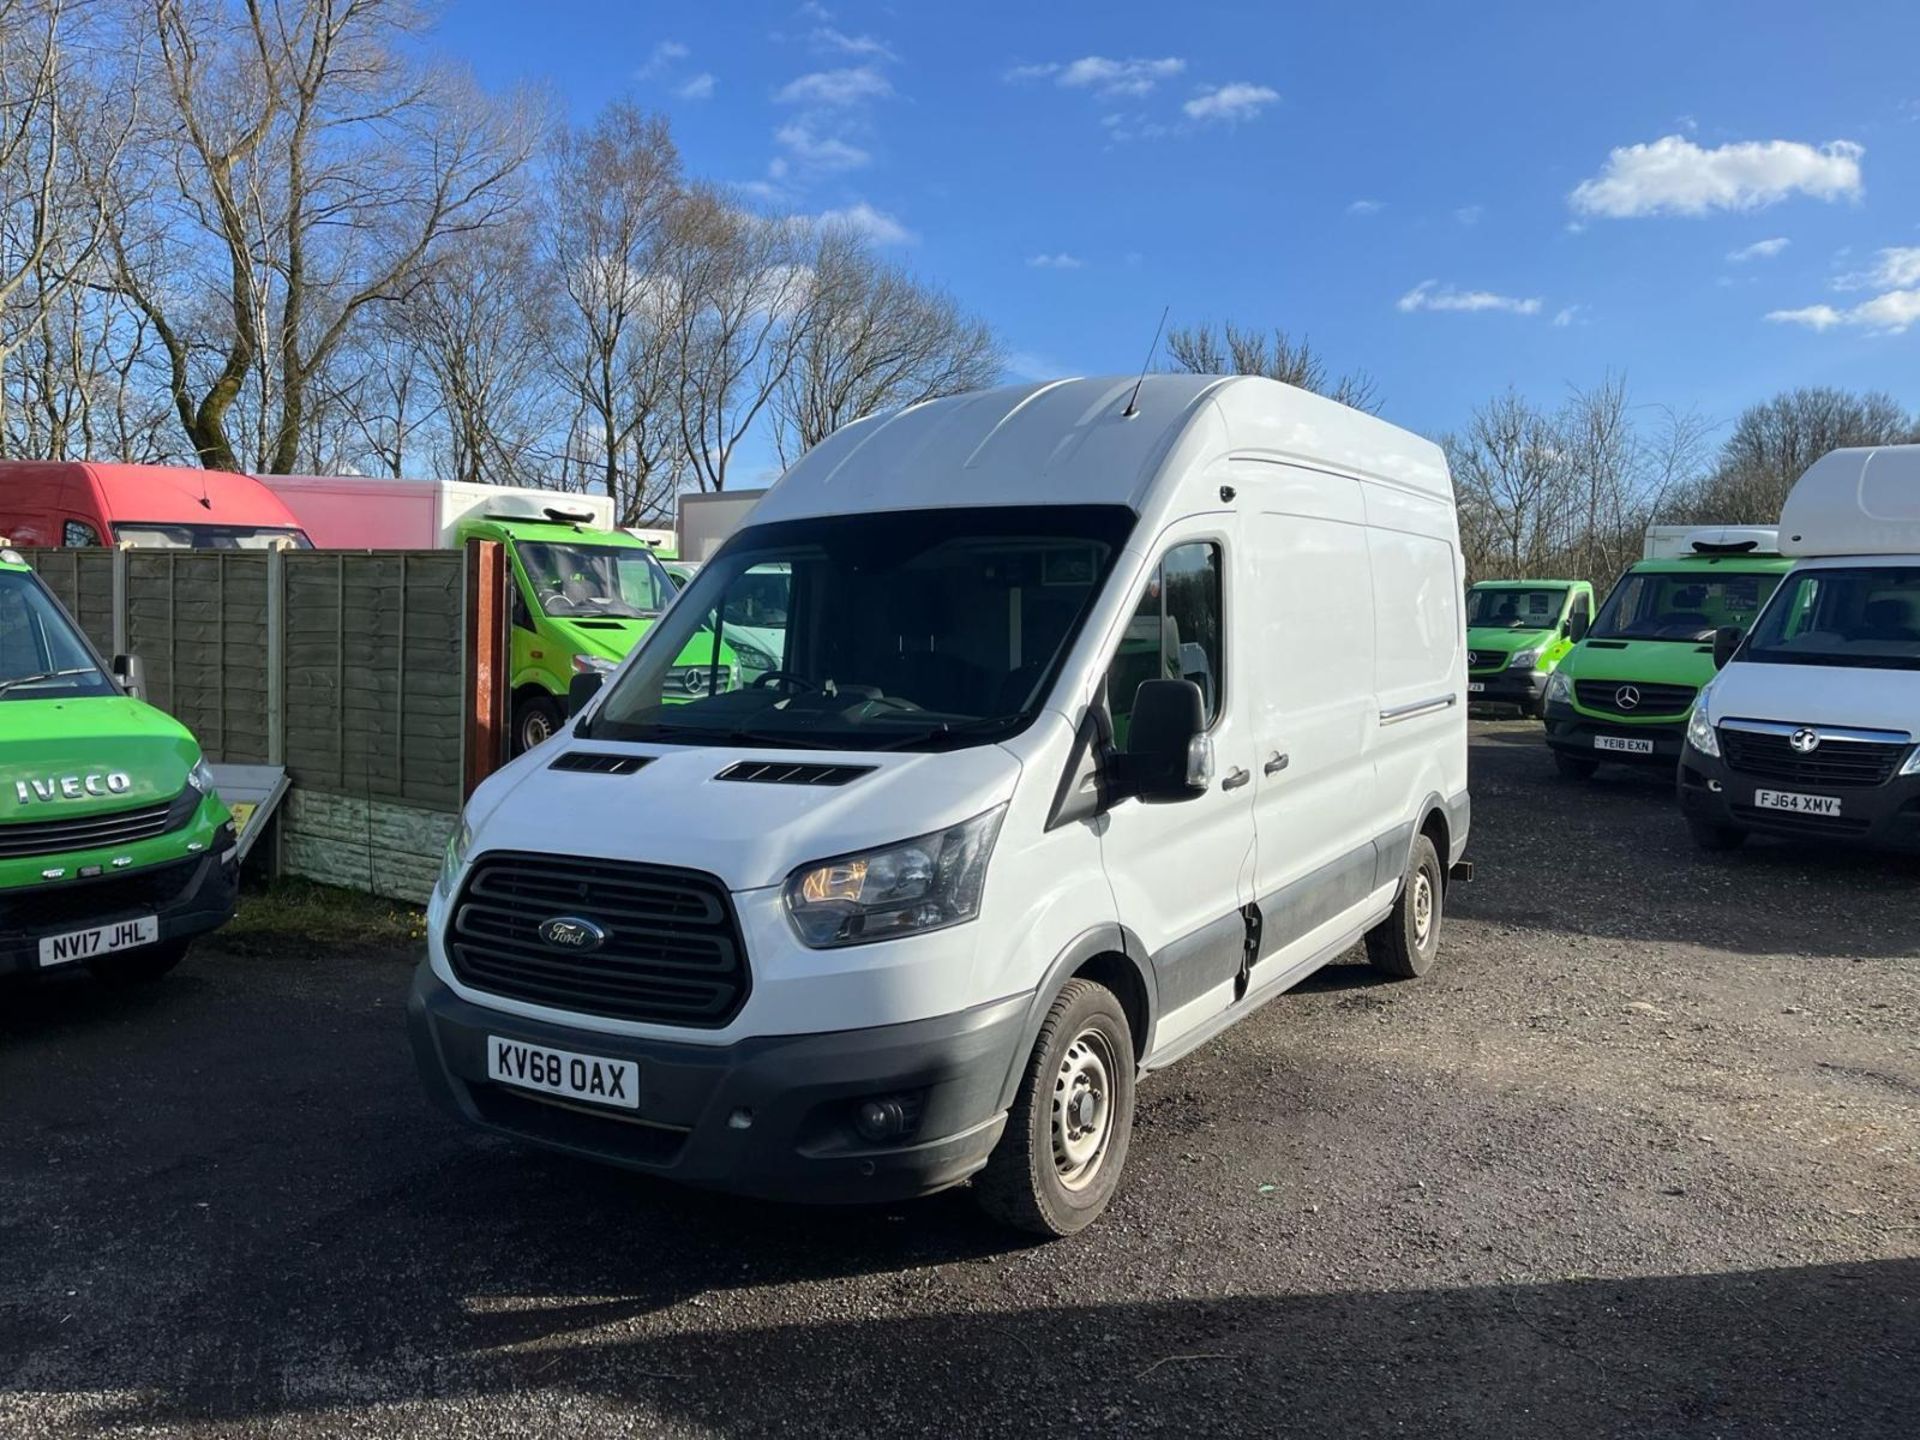 >>>SPECIAL CLEARANCE<<< 2018 FORD TRANSIT 2.0 TDCI 130PS L3 H3 - RELIABLE, SPACIOUS